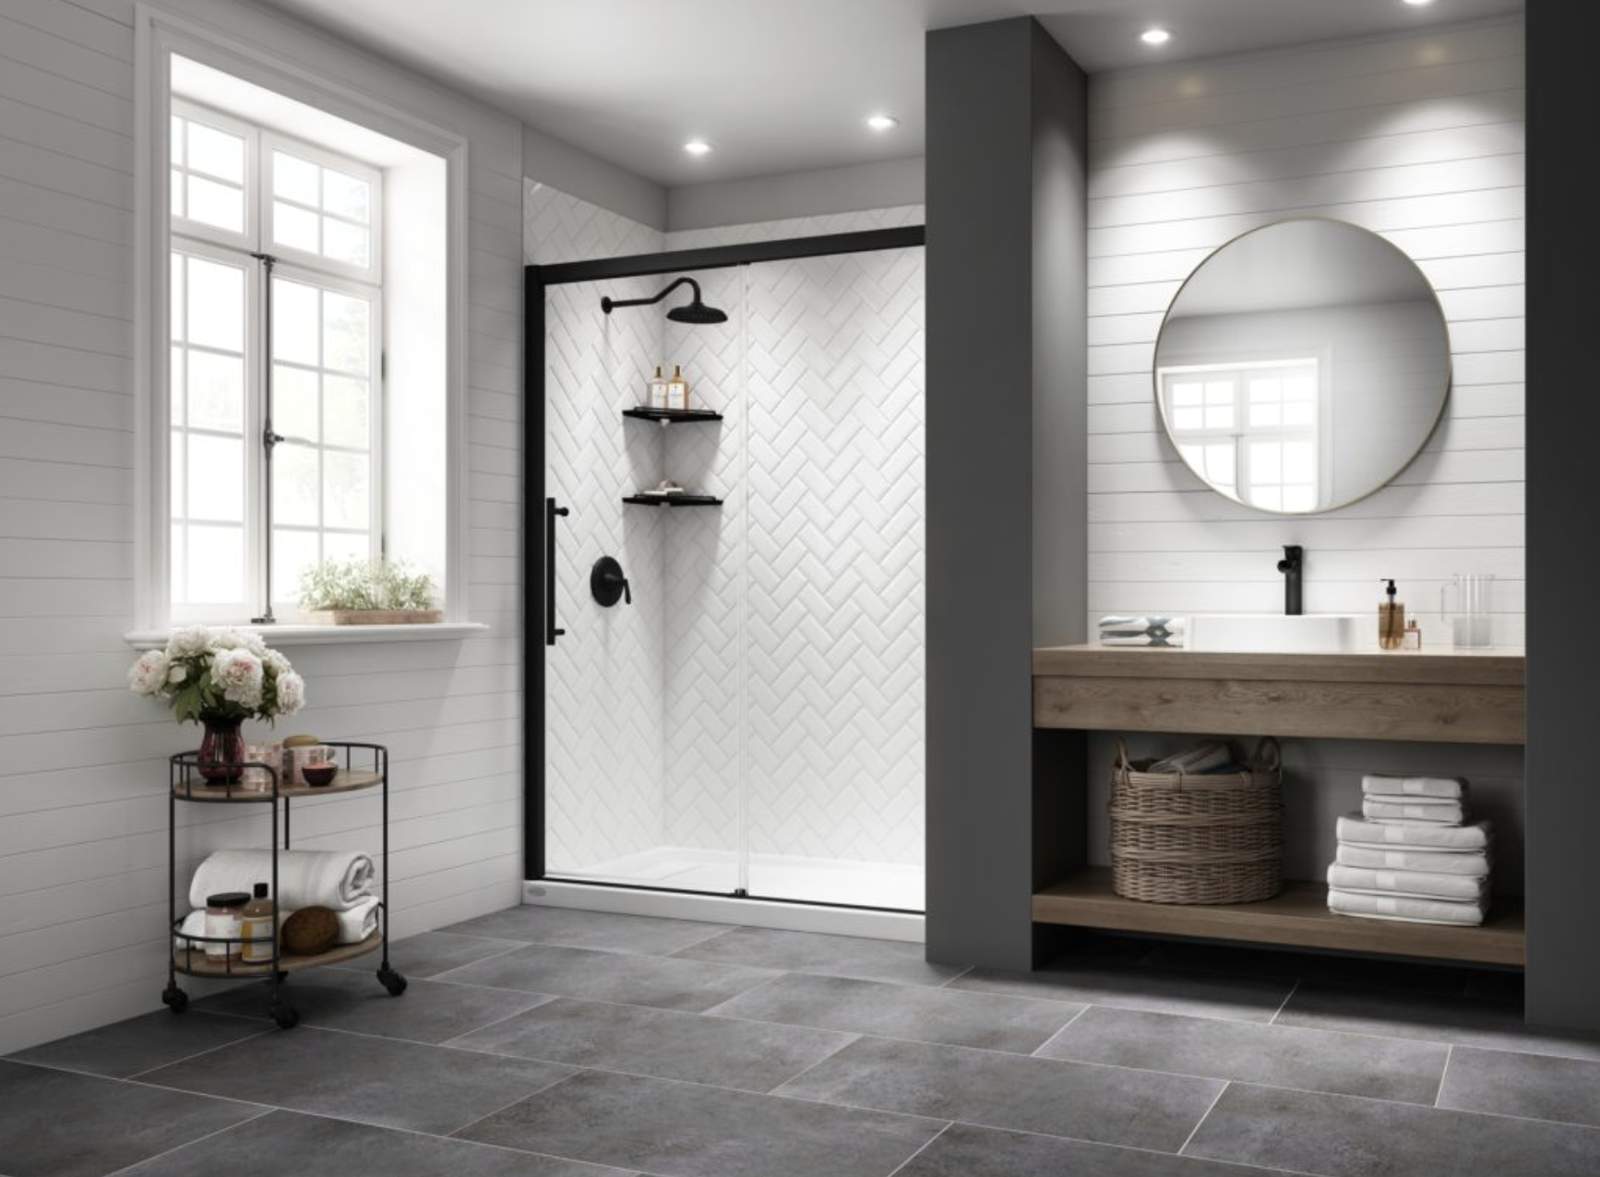 Remodeling in the new year? 5 bathroom design trends to consider in 2021